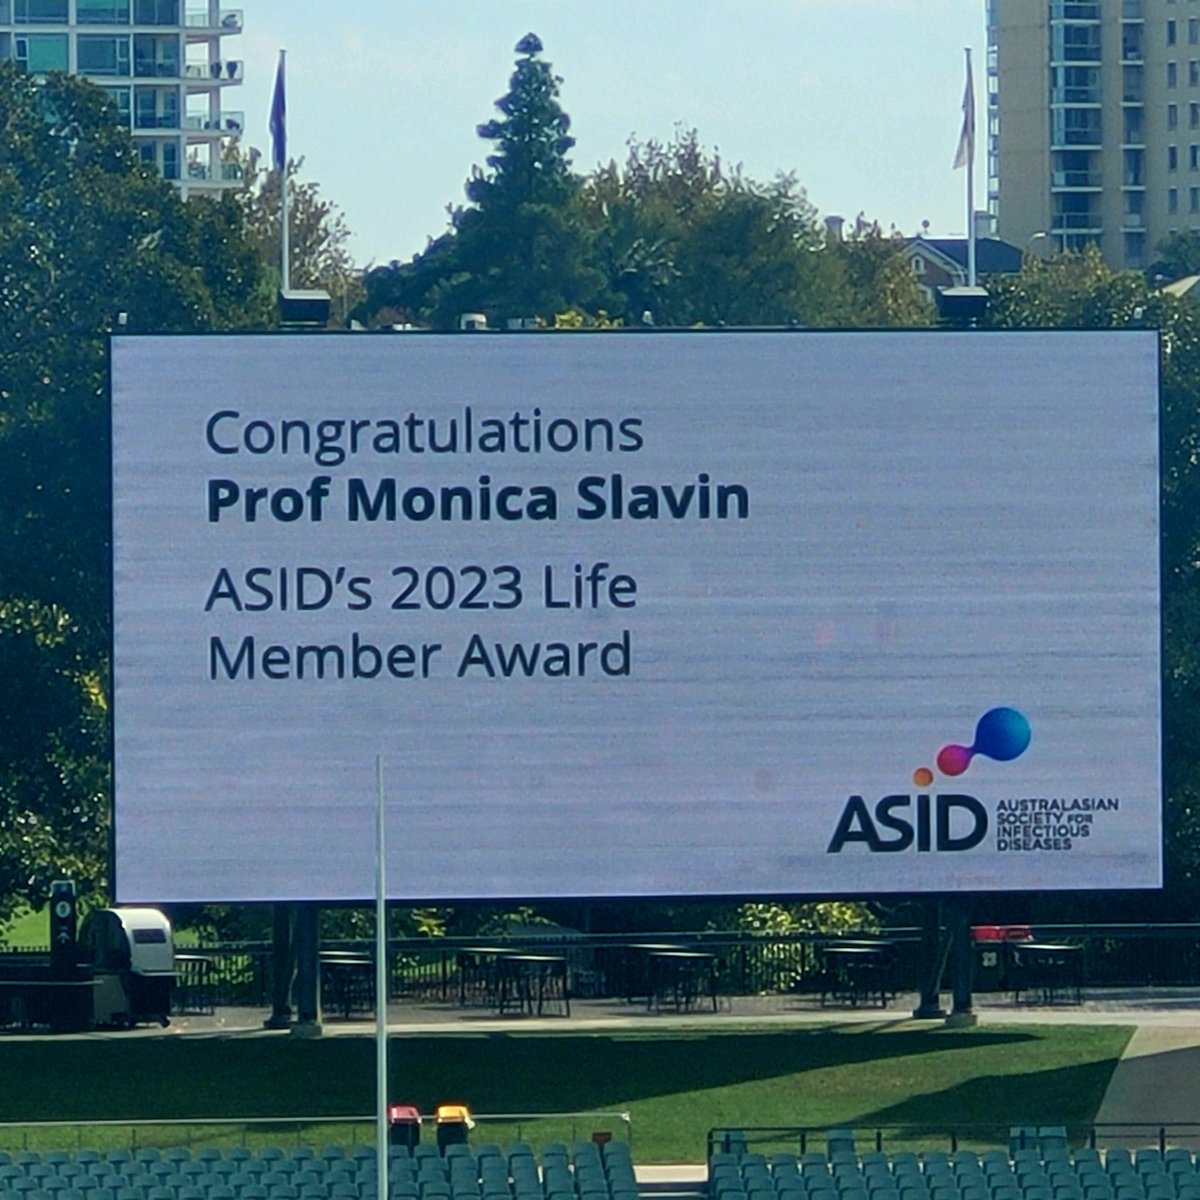 This is everything. @monicaslavin @TheAdelaideOval #asid23